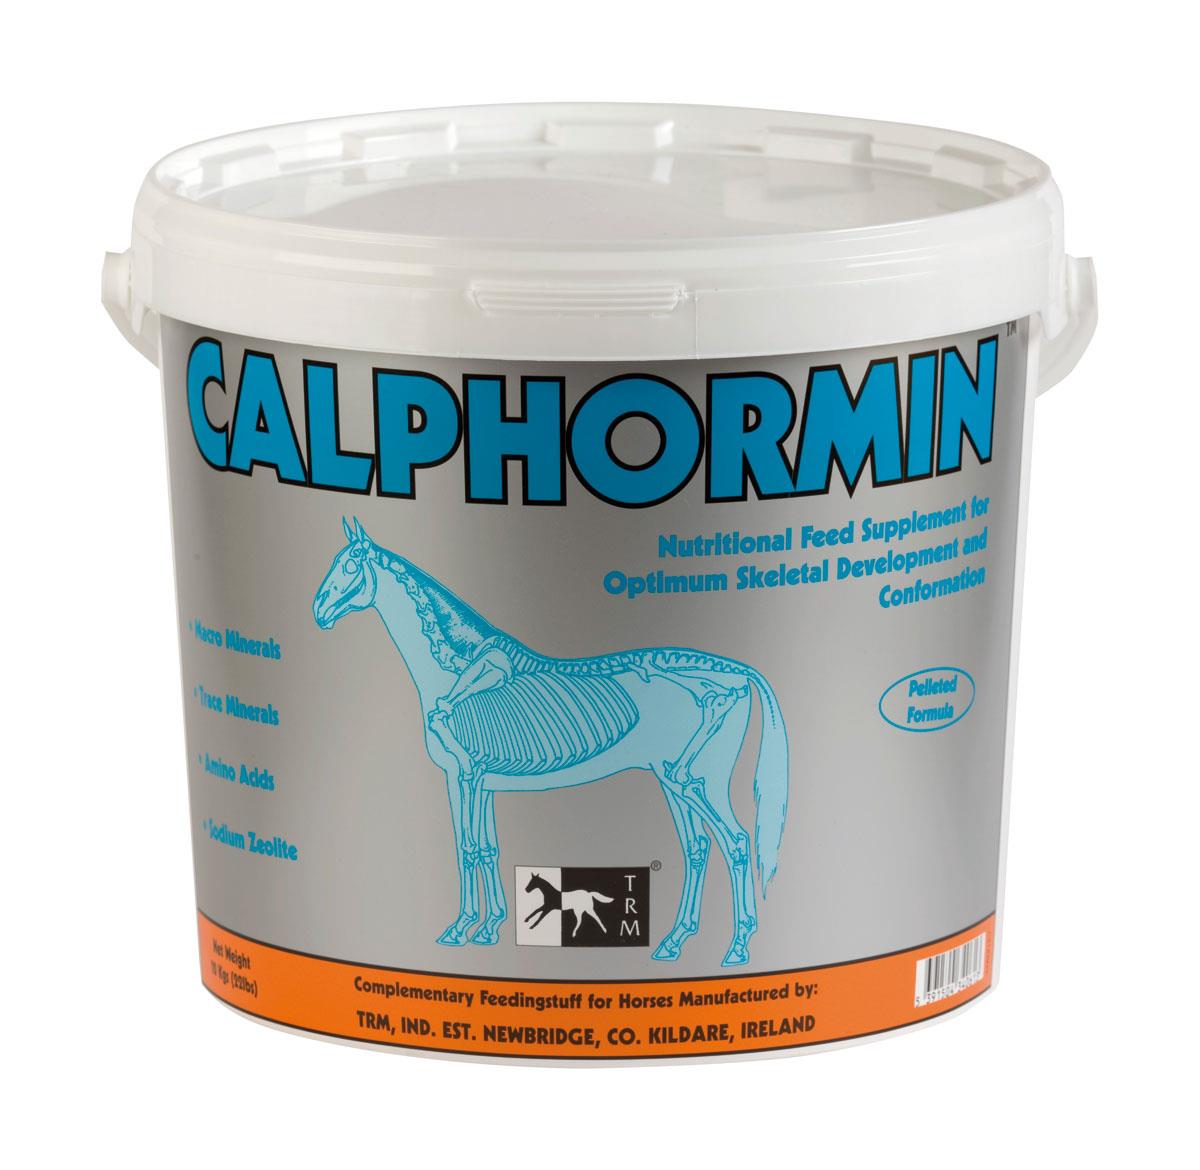 Thoroughbred Remedies Calphormin - Just Horse Riders